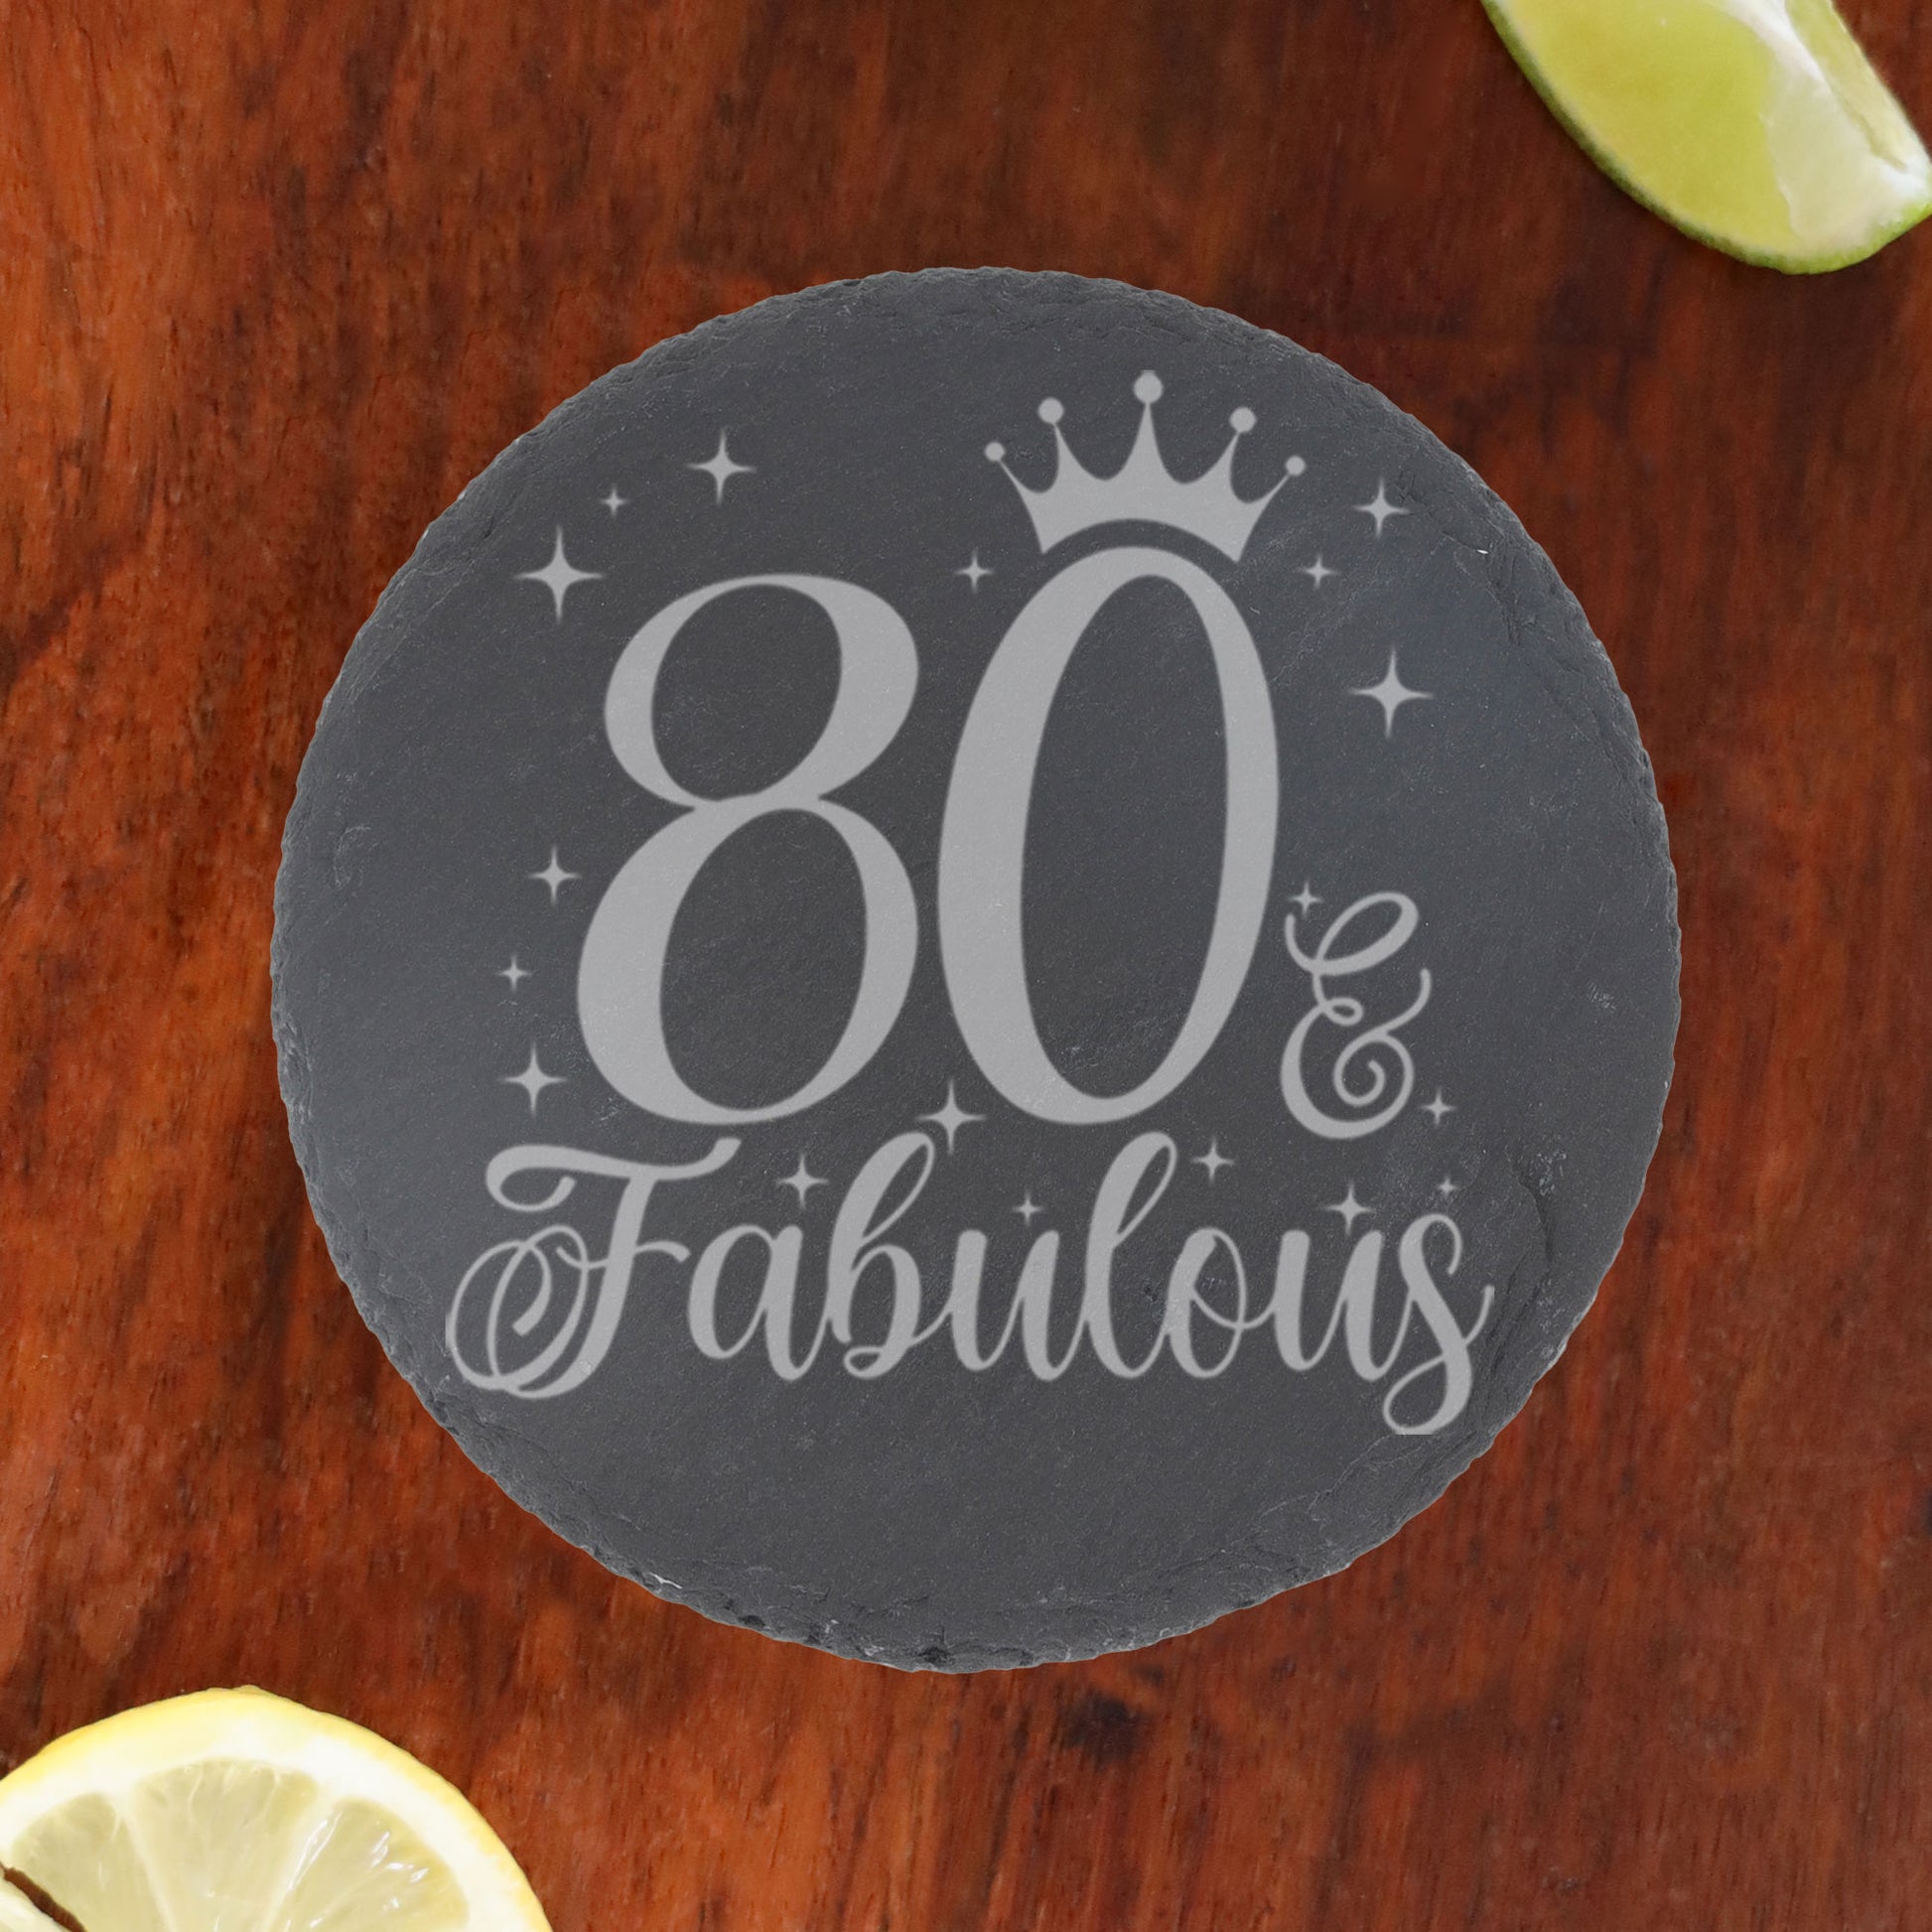 80 & Fabulous 80th Birthday Gift Engraved Wine Glass and/or Coaster Set  - Always Looking Good - Round Coaster Only  